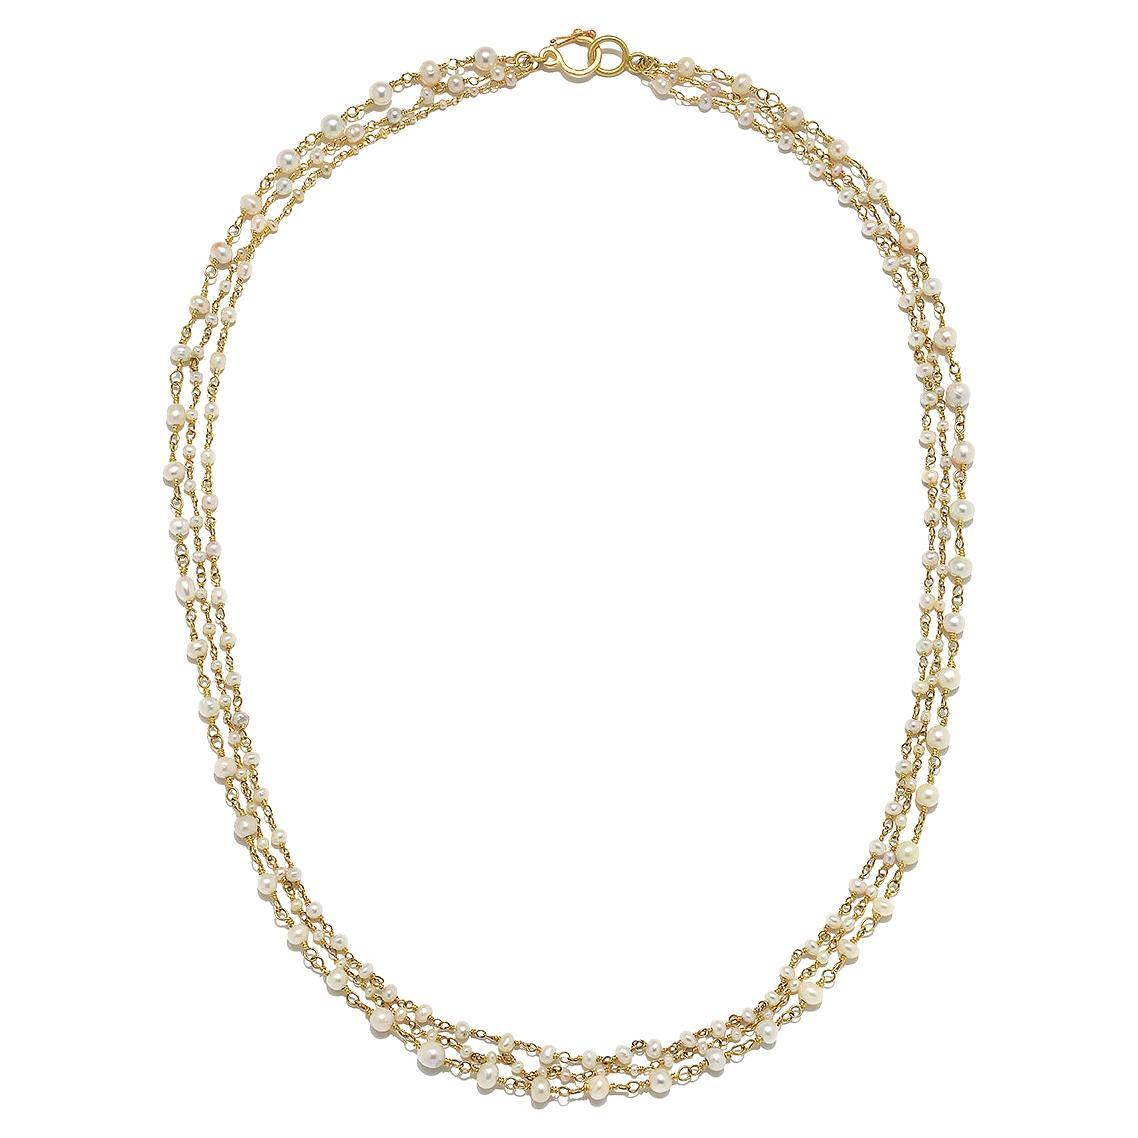 Faye Kim 18 Karat Gold Handwrapped Natural Pearl Chain Necklace For Sale